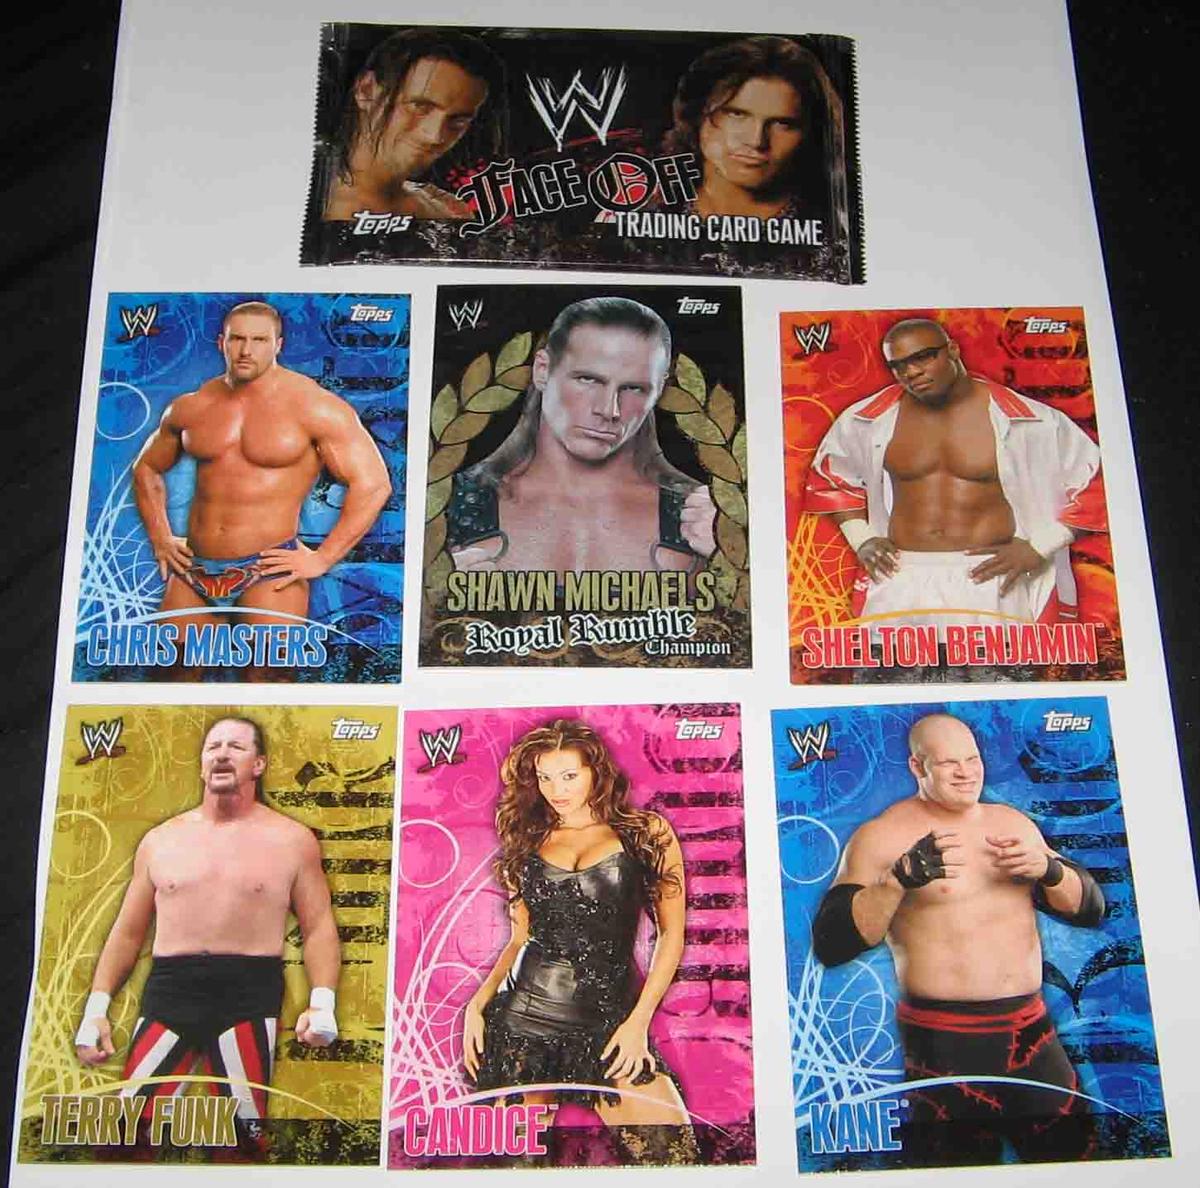 wwe_face_off_trading_card_game.jpg